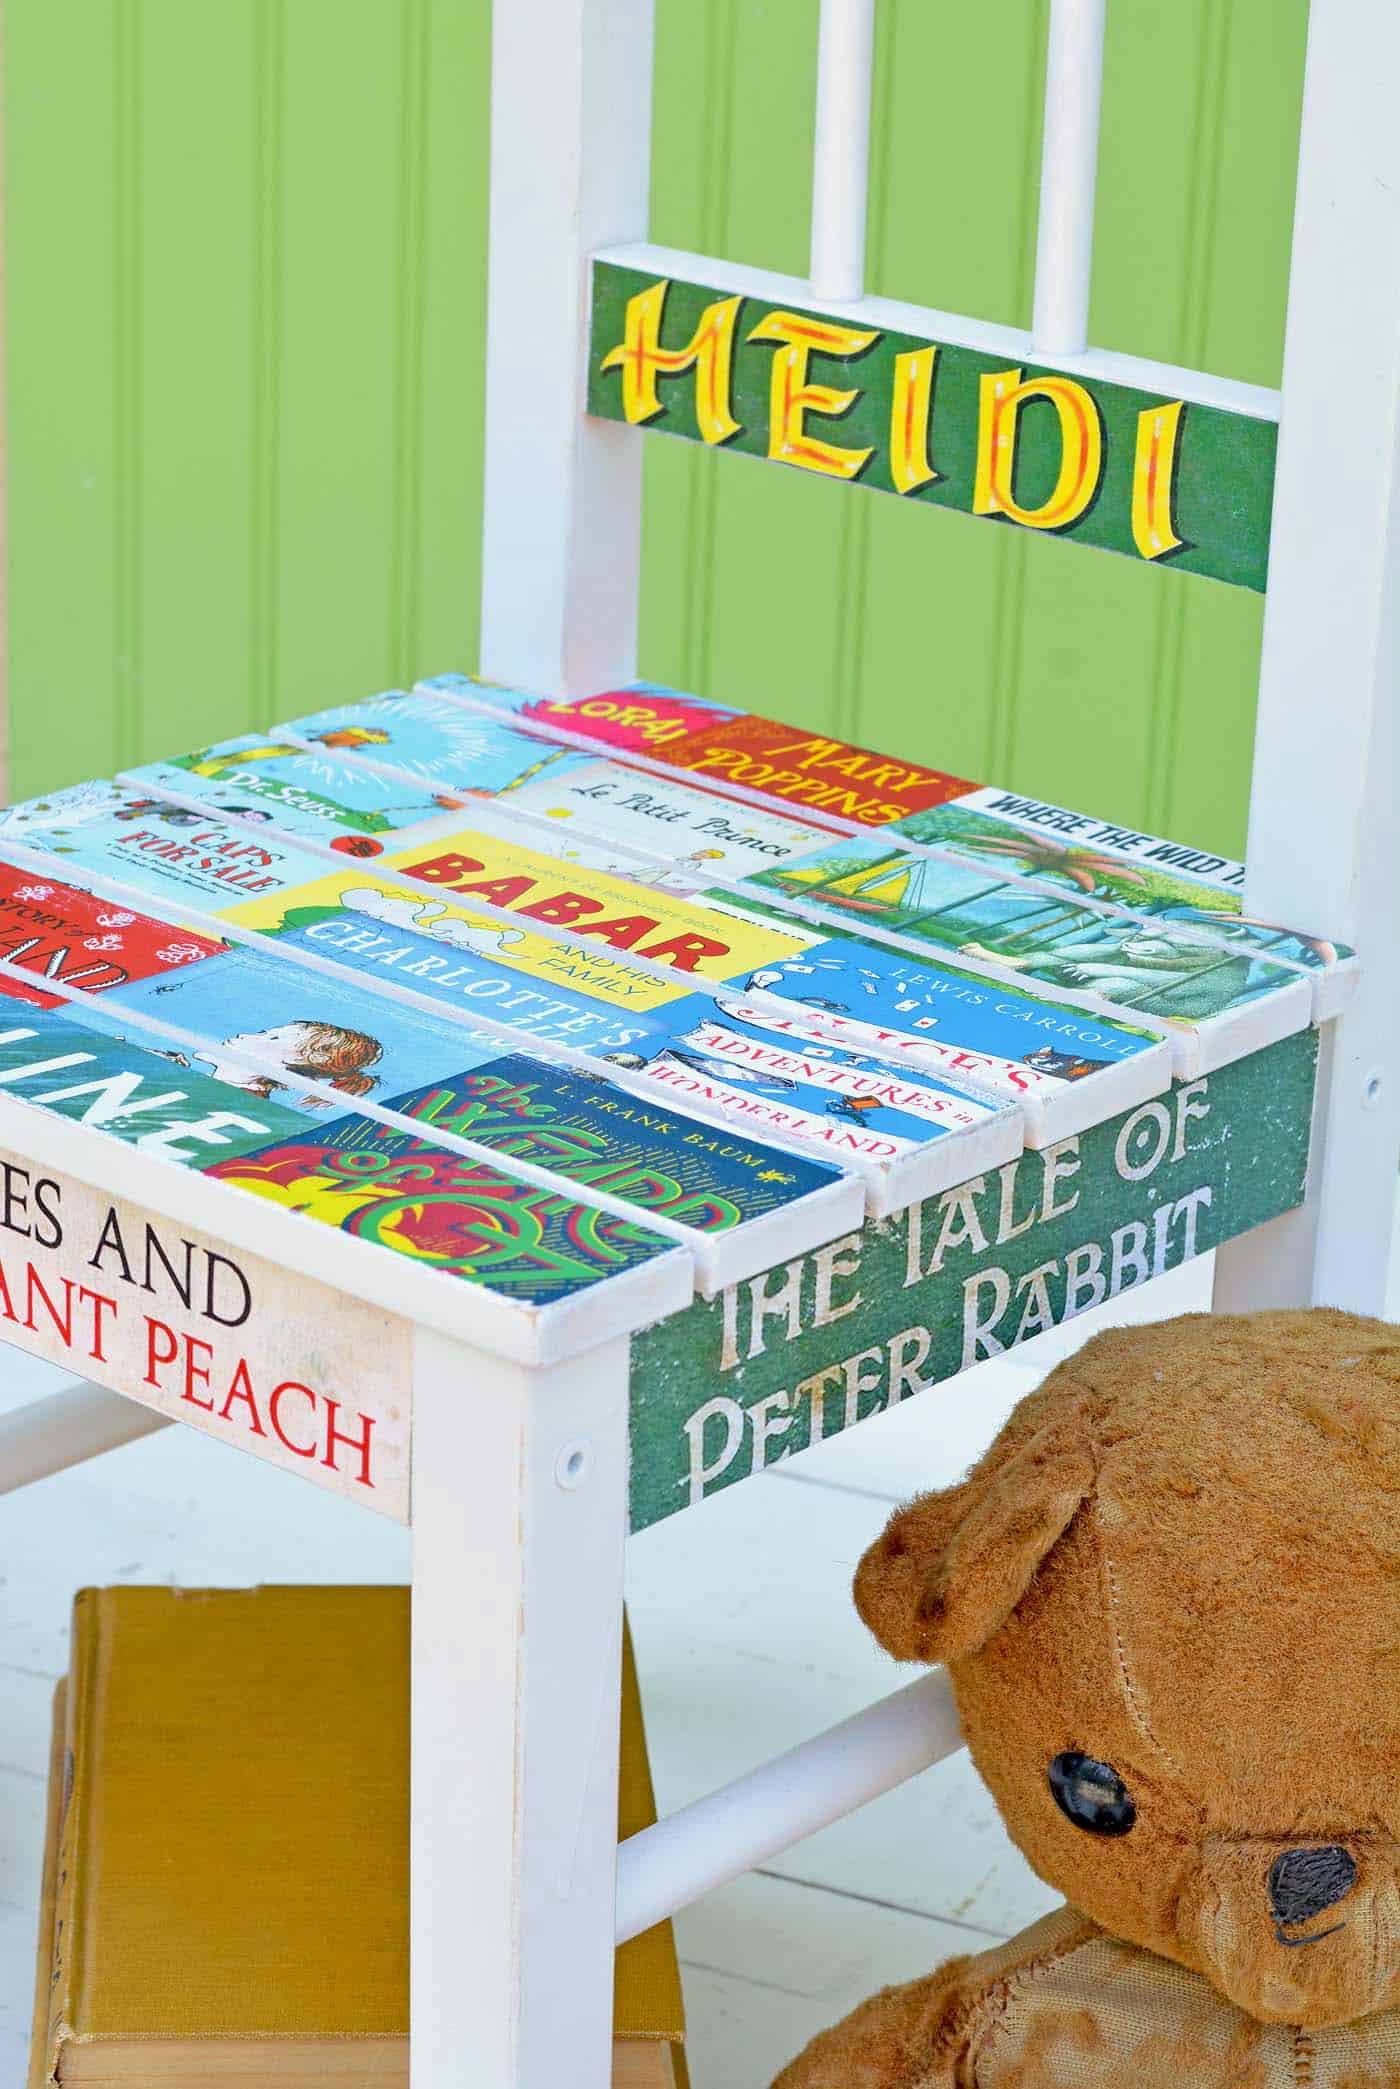 This DIY chair makeover is perfect for the child (or adult) that loves reading! Use images of book covers and decoupage medium to make this fun project.